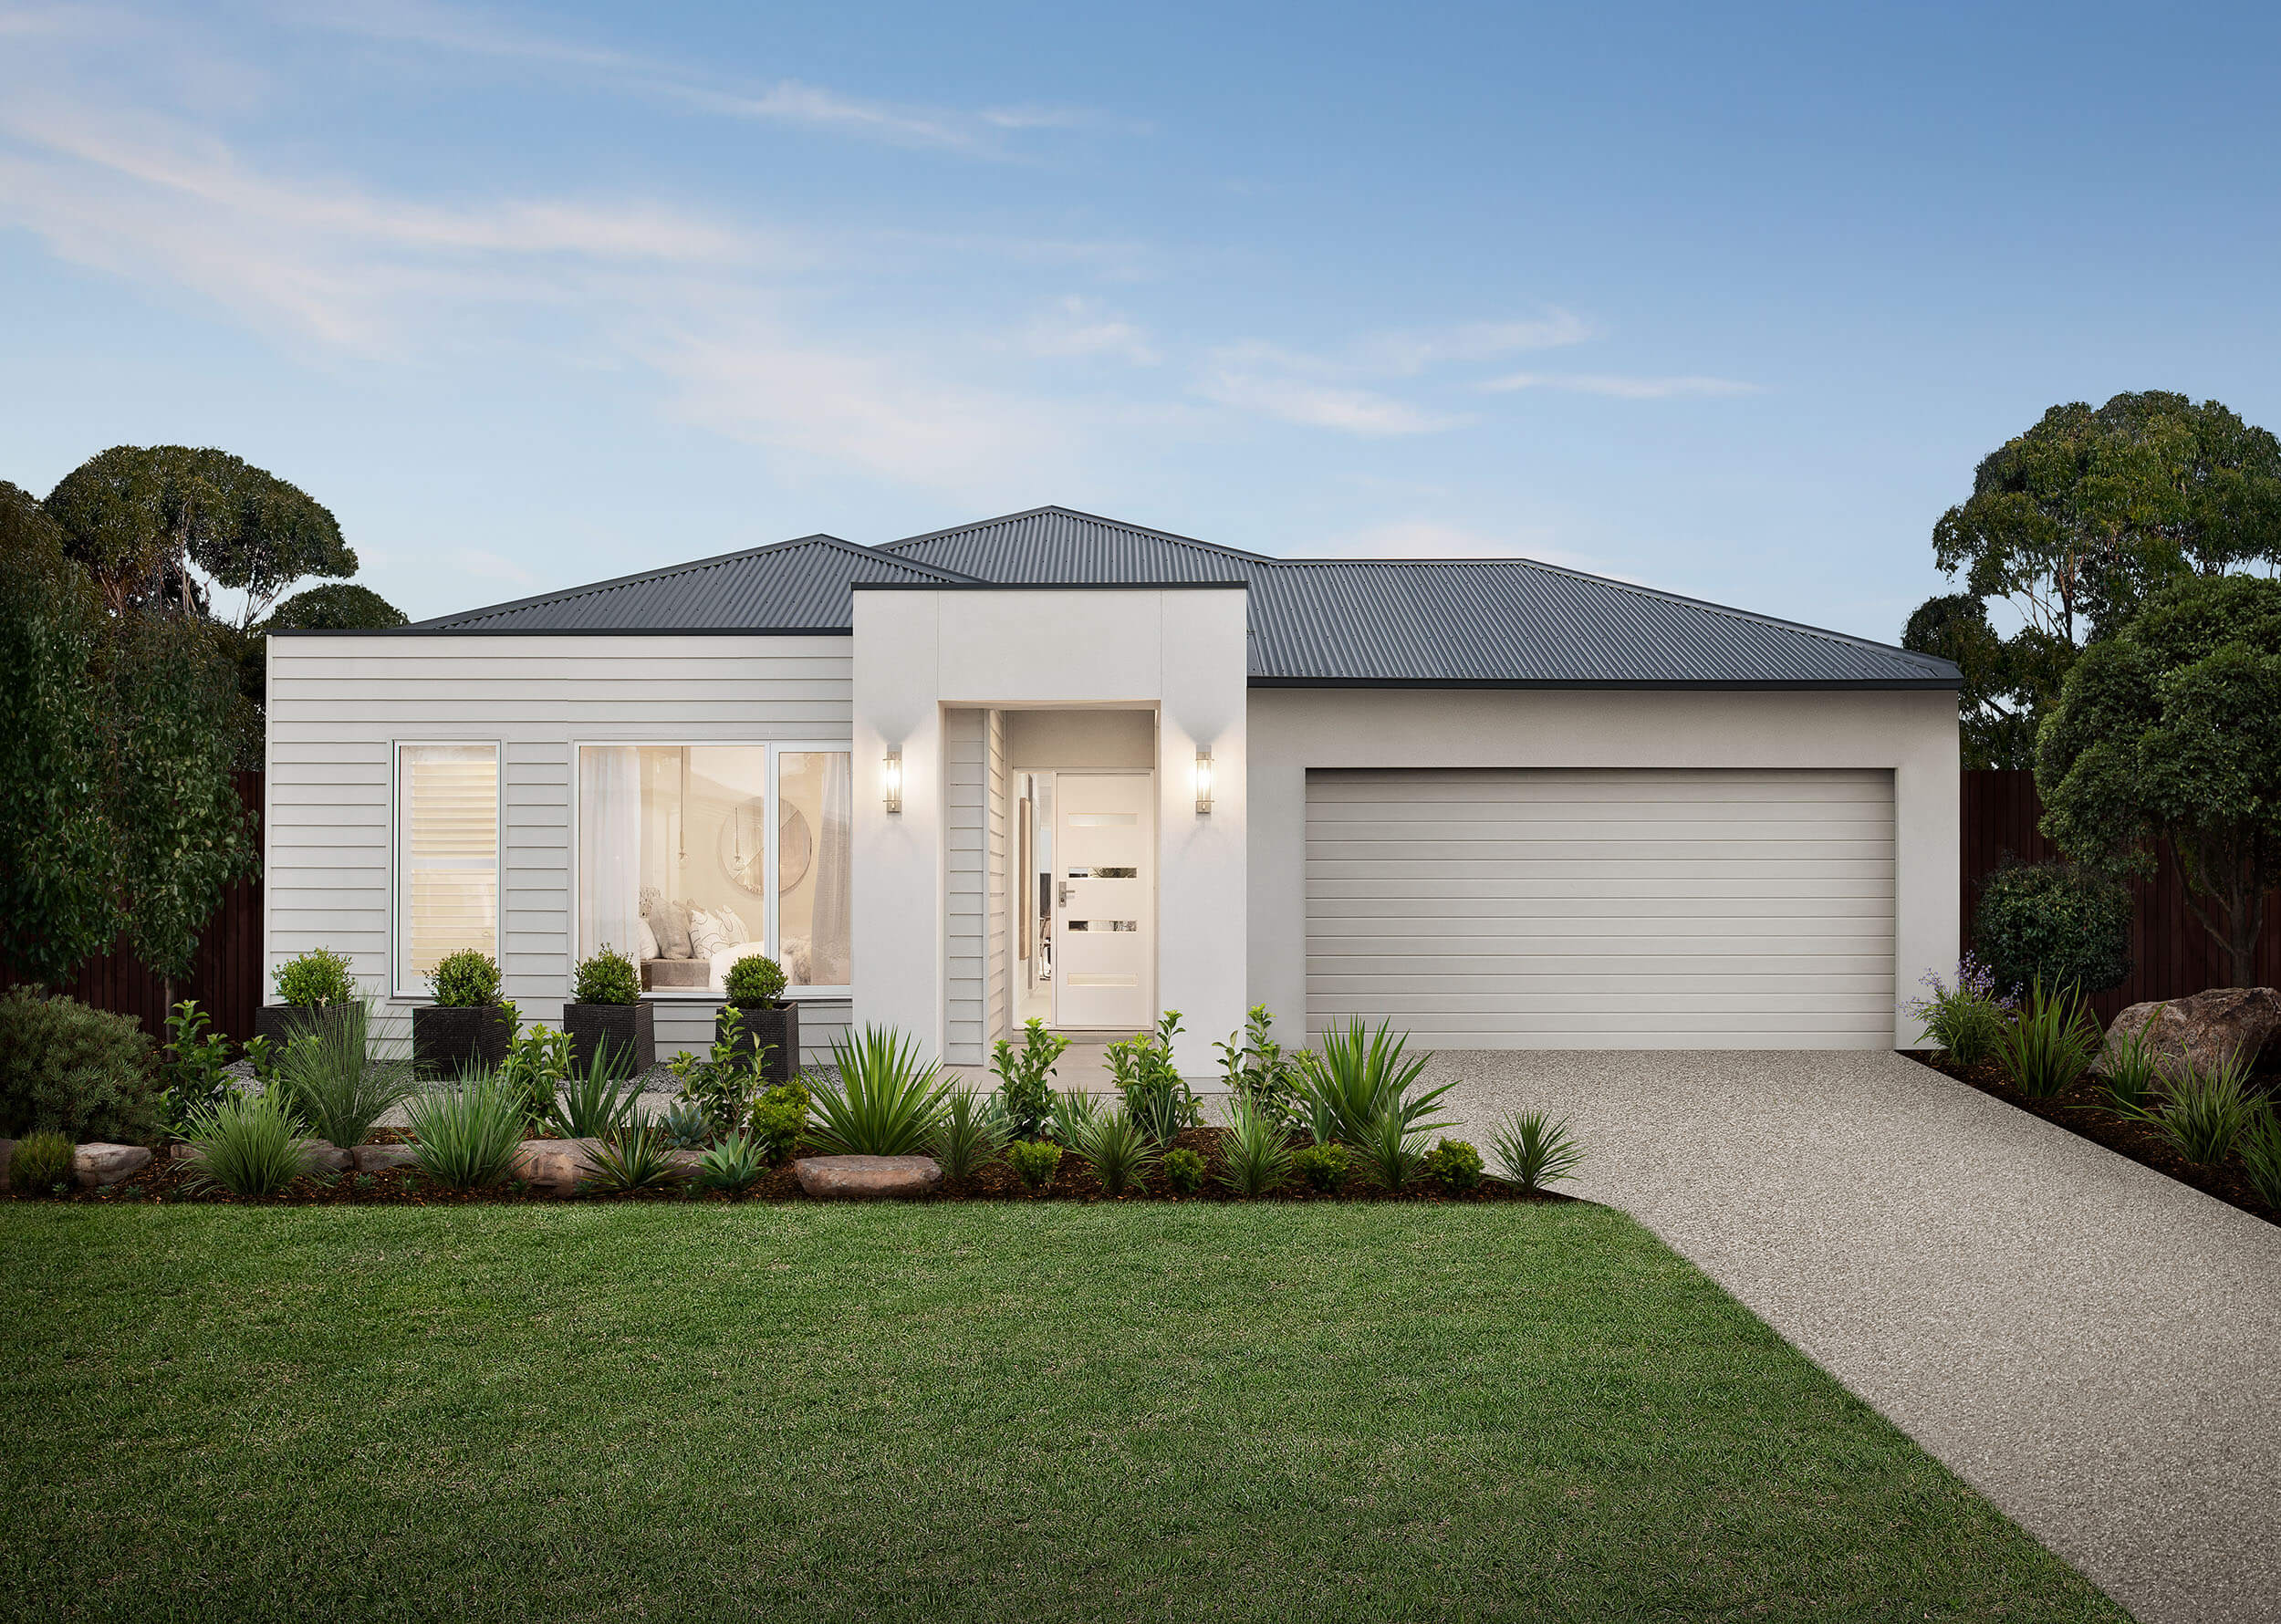 Home builders in Melbourne, Rye façade on display at Peppercorn Hill Estate in Donnybrook